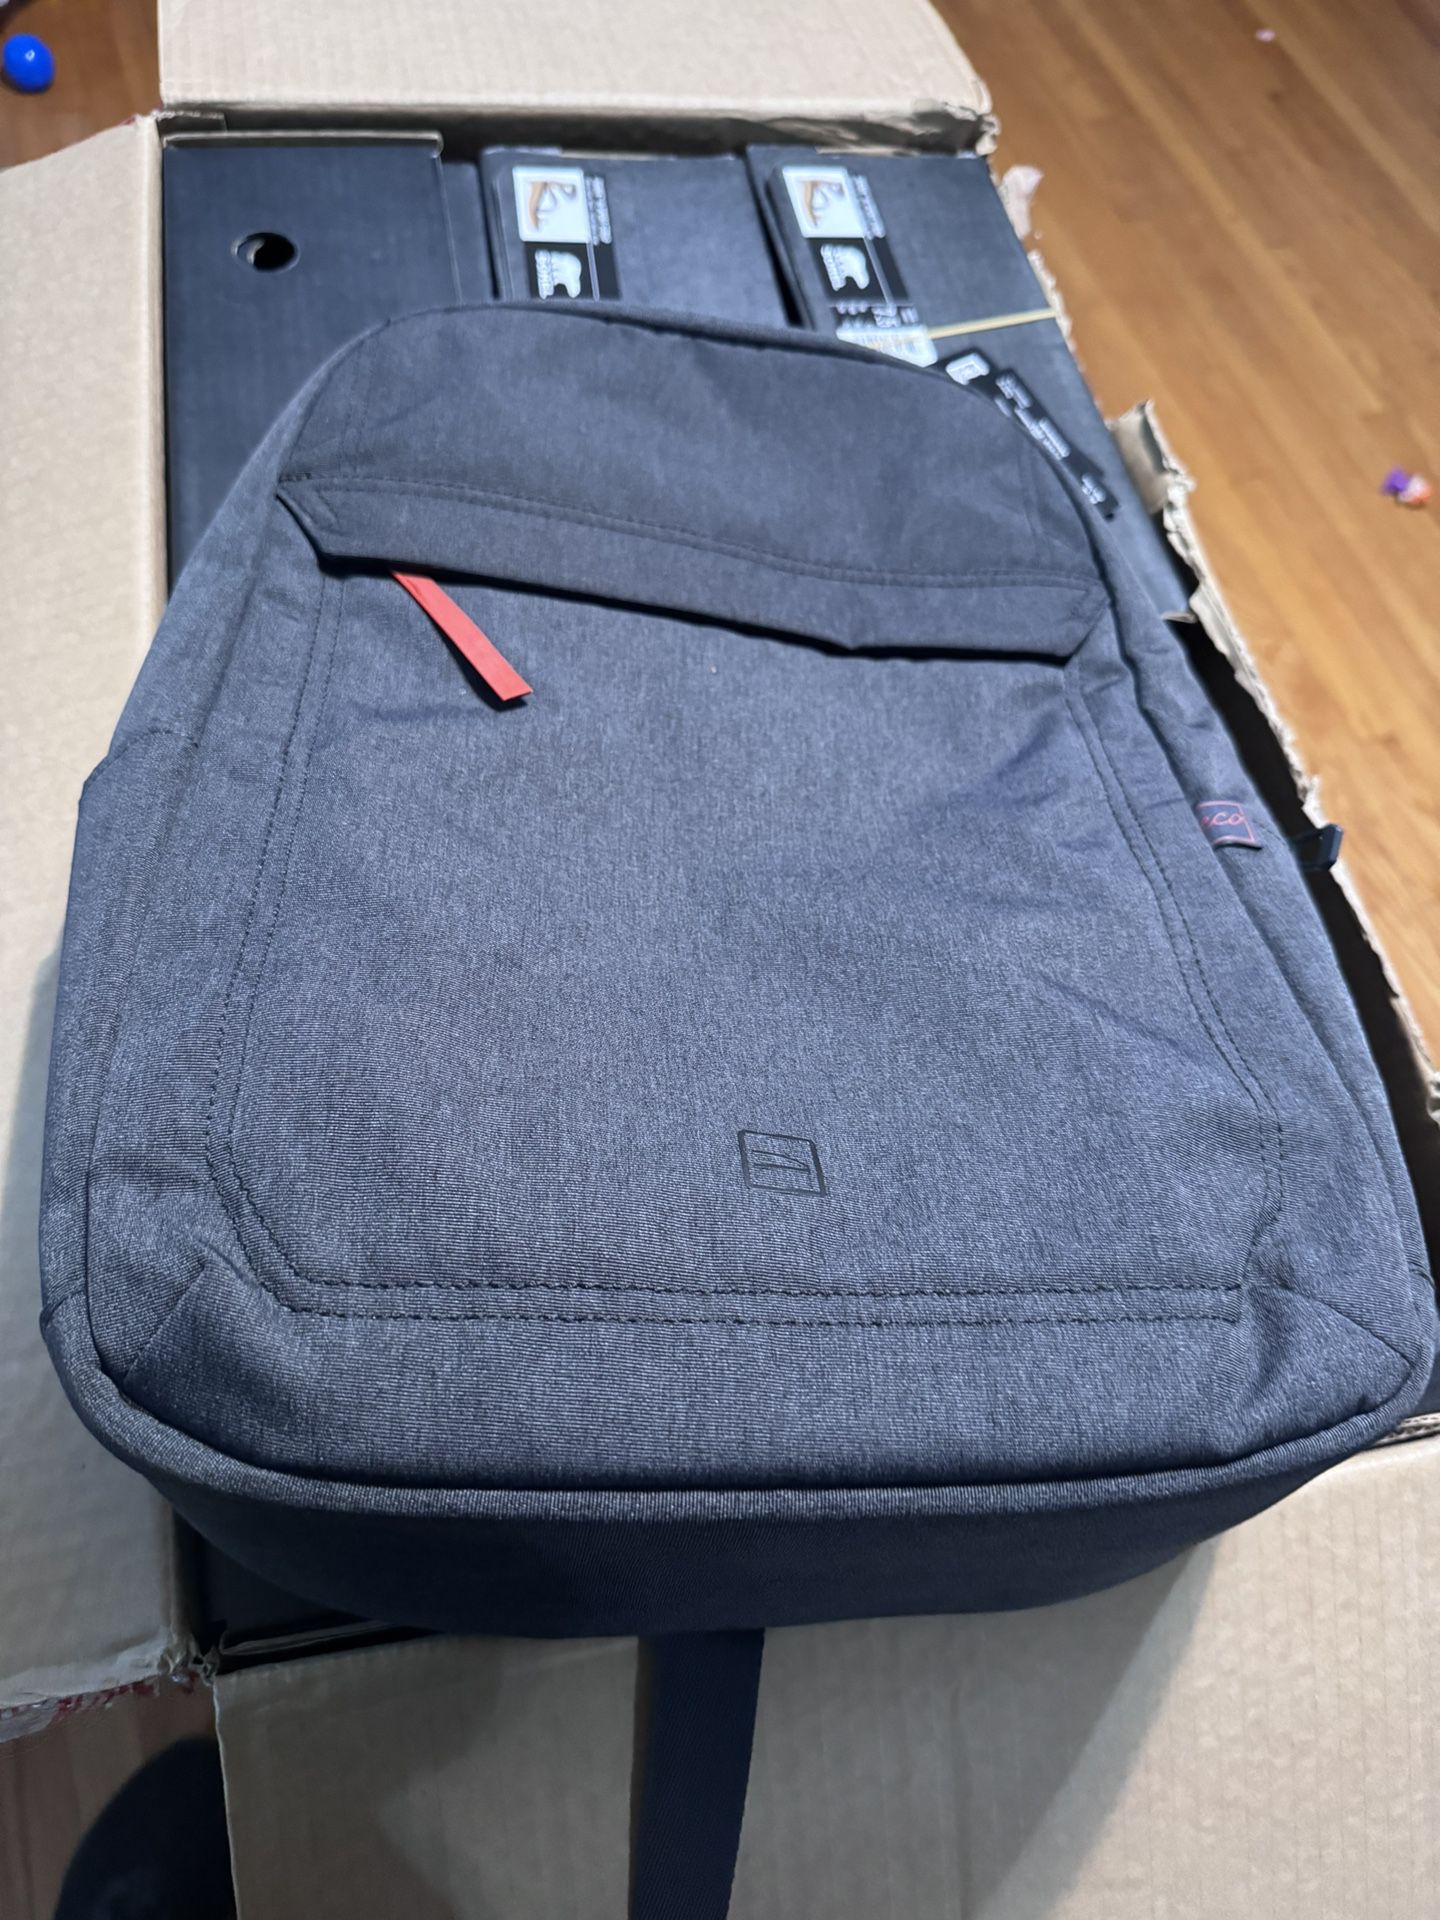 Backpack For Laptop 